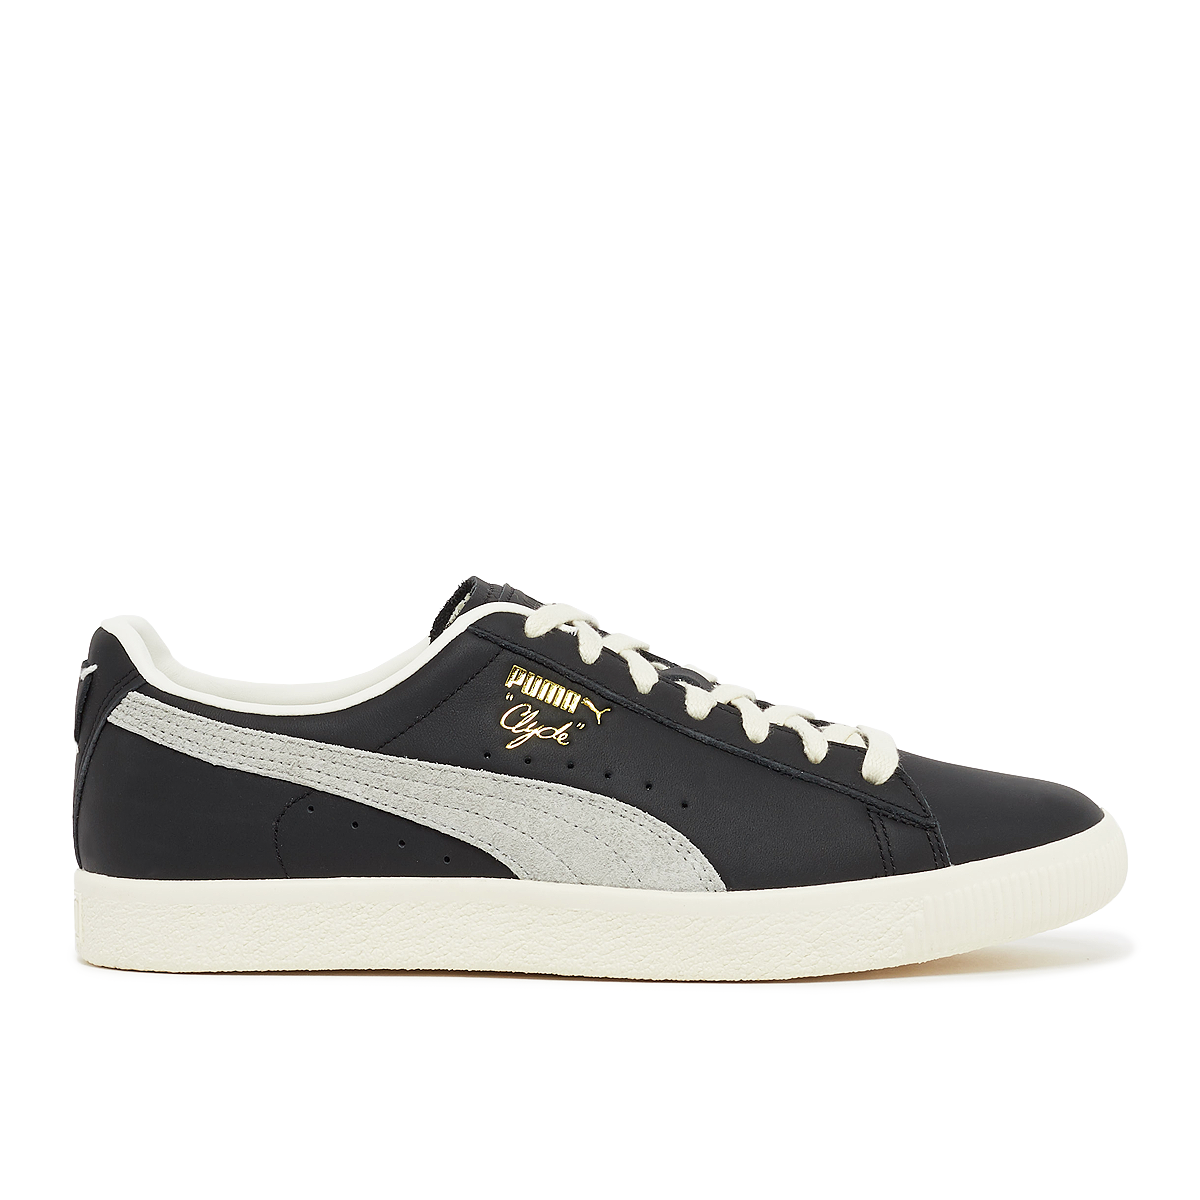 Puma Men's Clyde Base Sneakers in Black/Gold - 390091-02